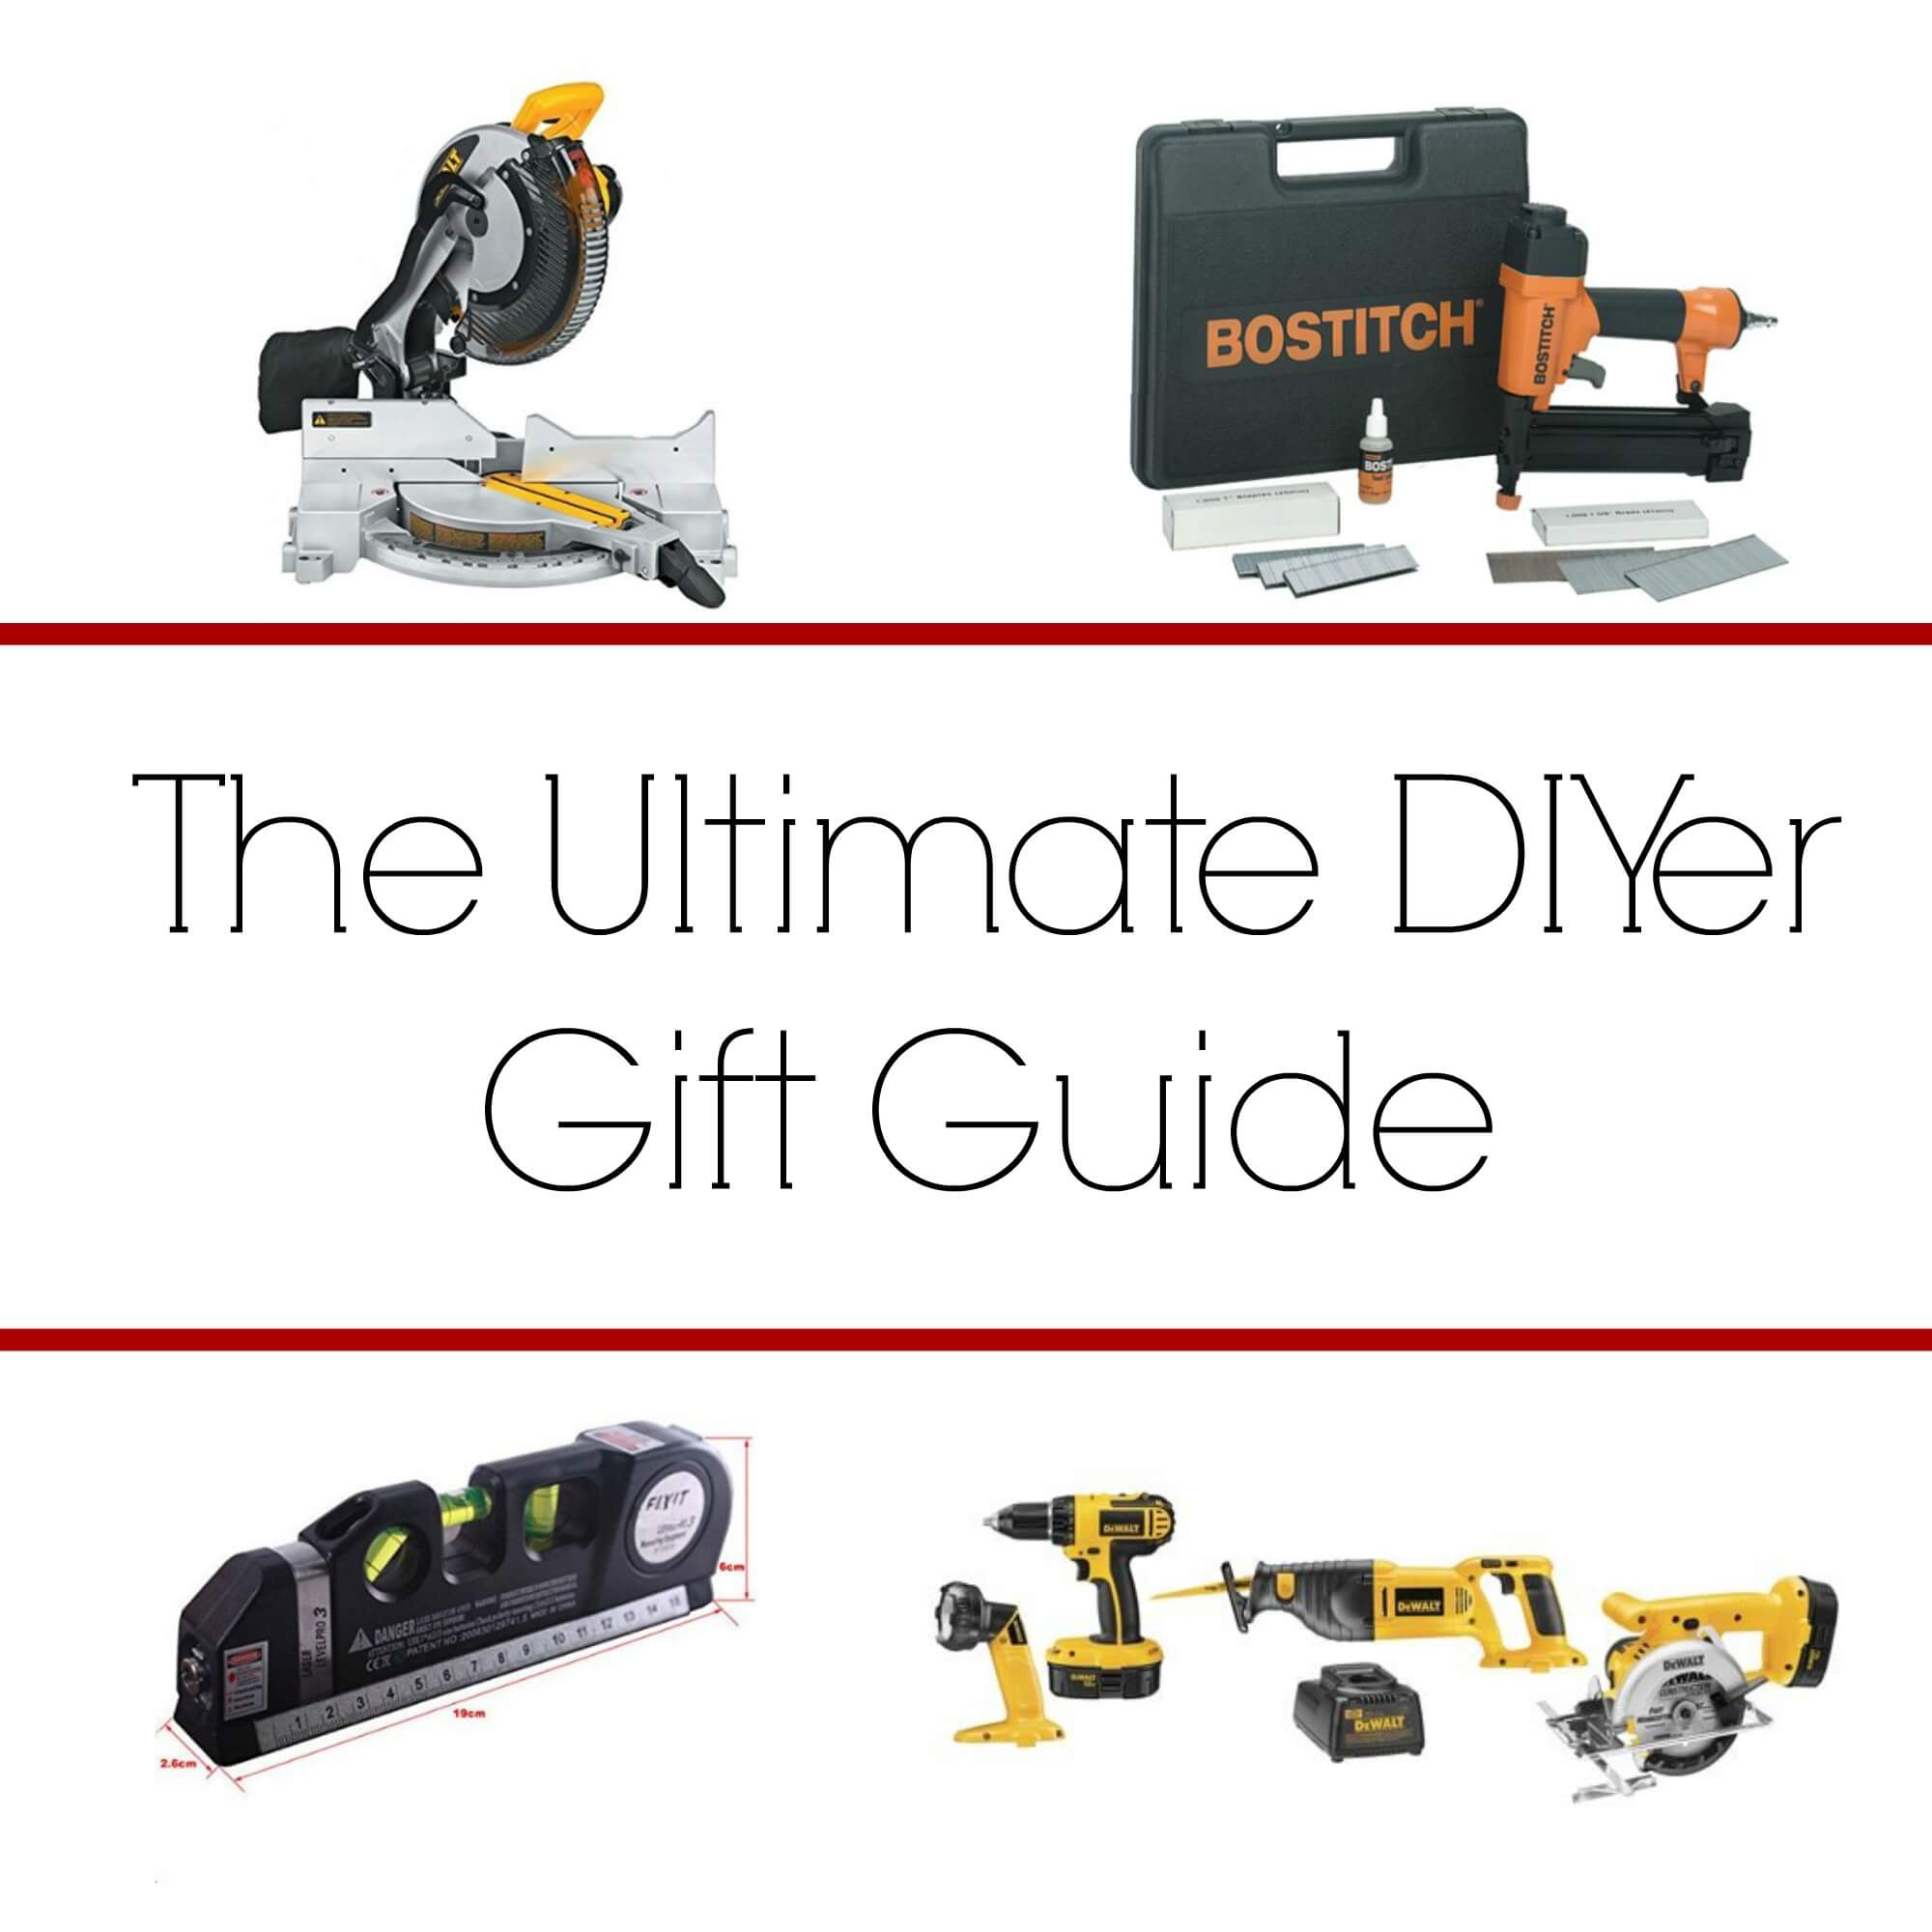 The Ultimate DIYer Gift Guide